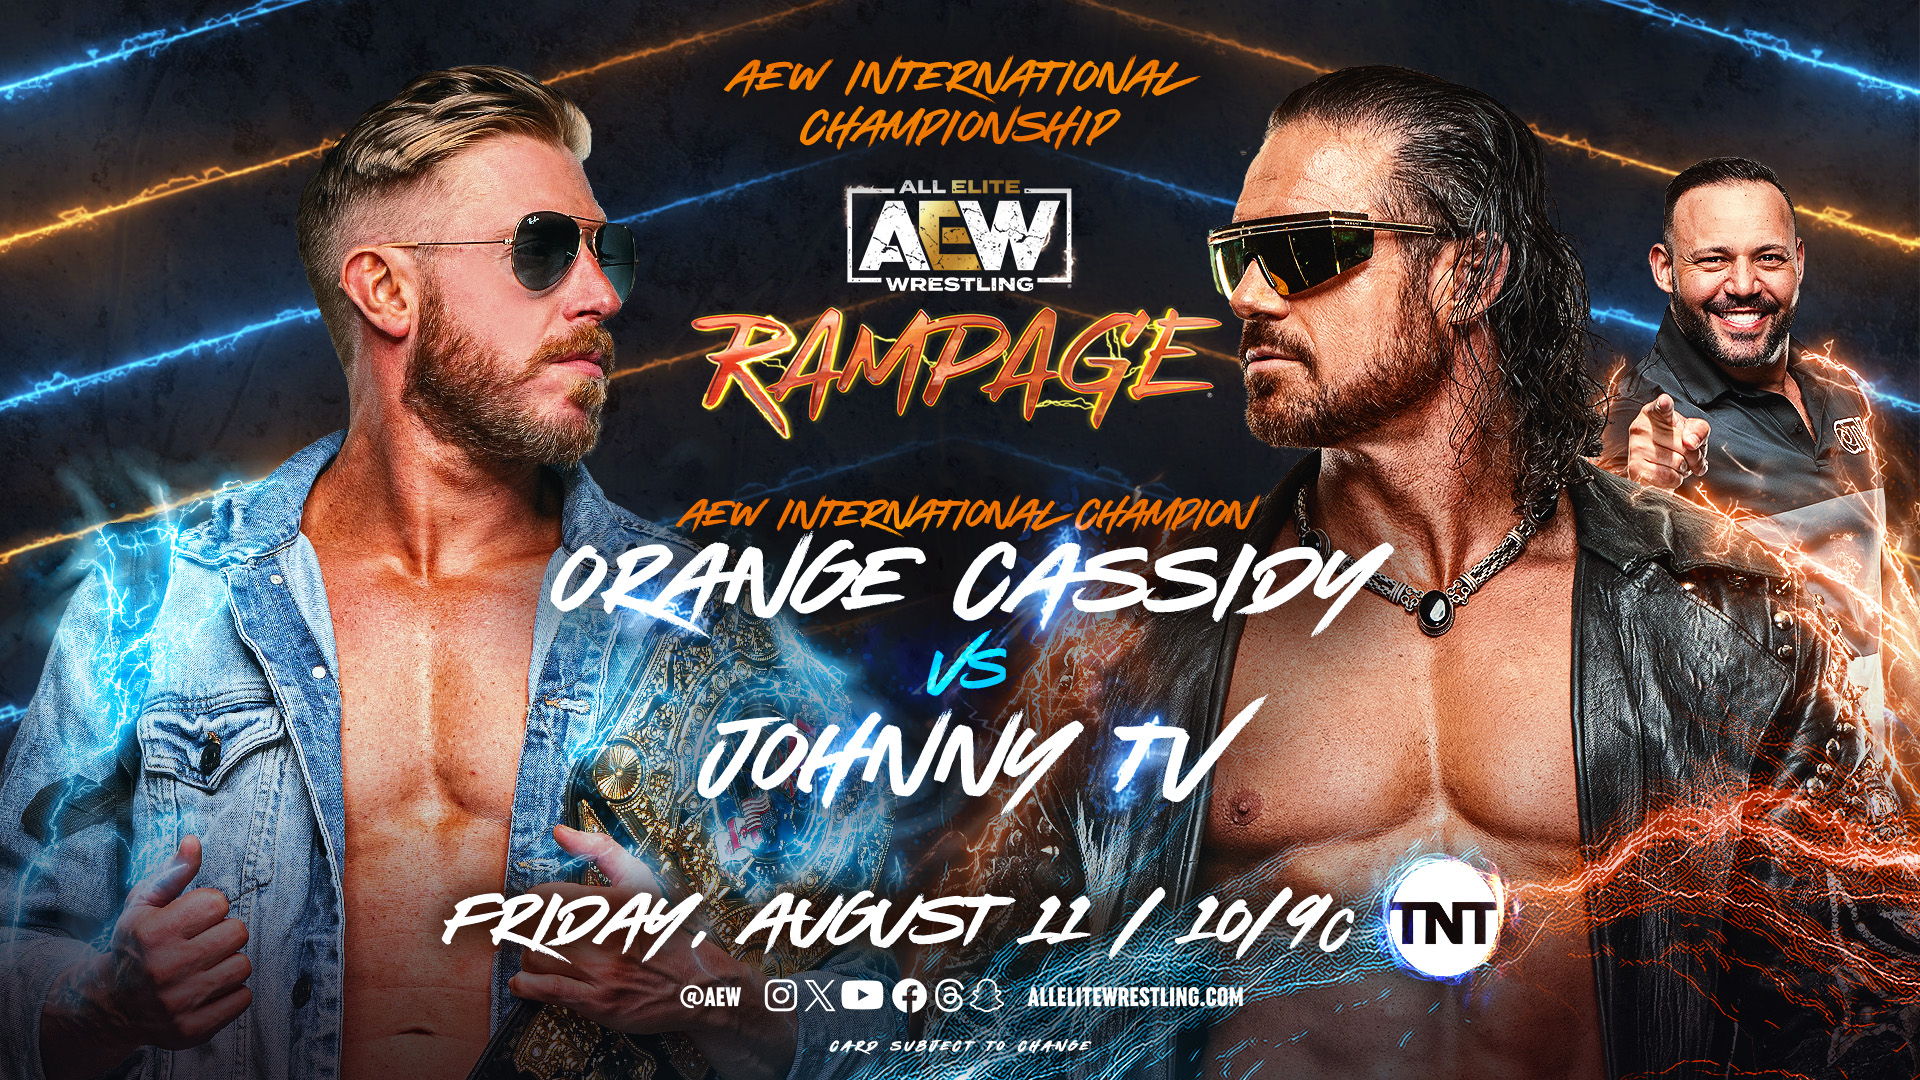 An AEW Rampage match graphic hyping up the AEW International Title Match.